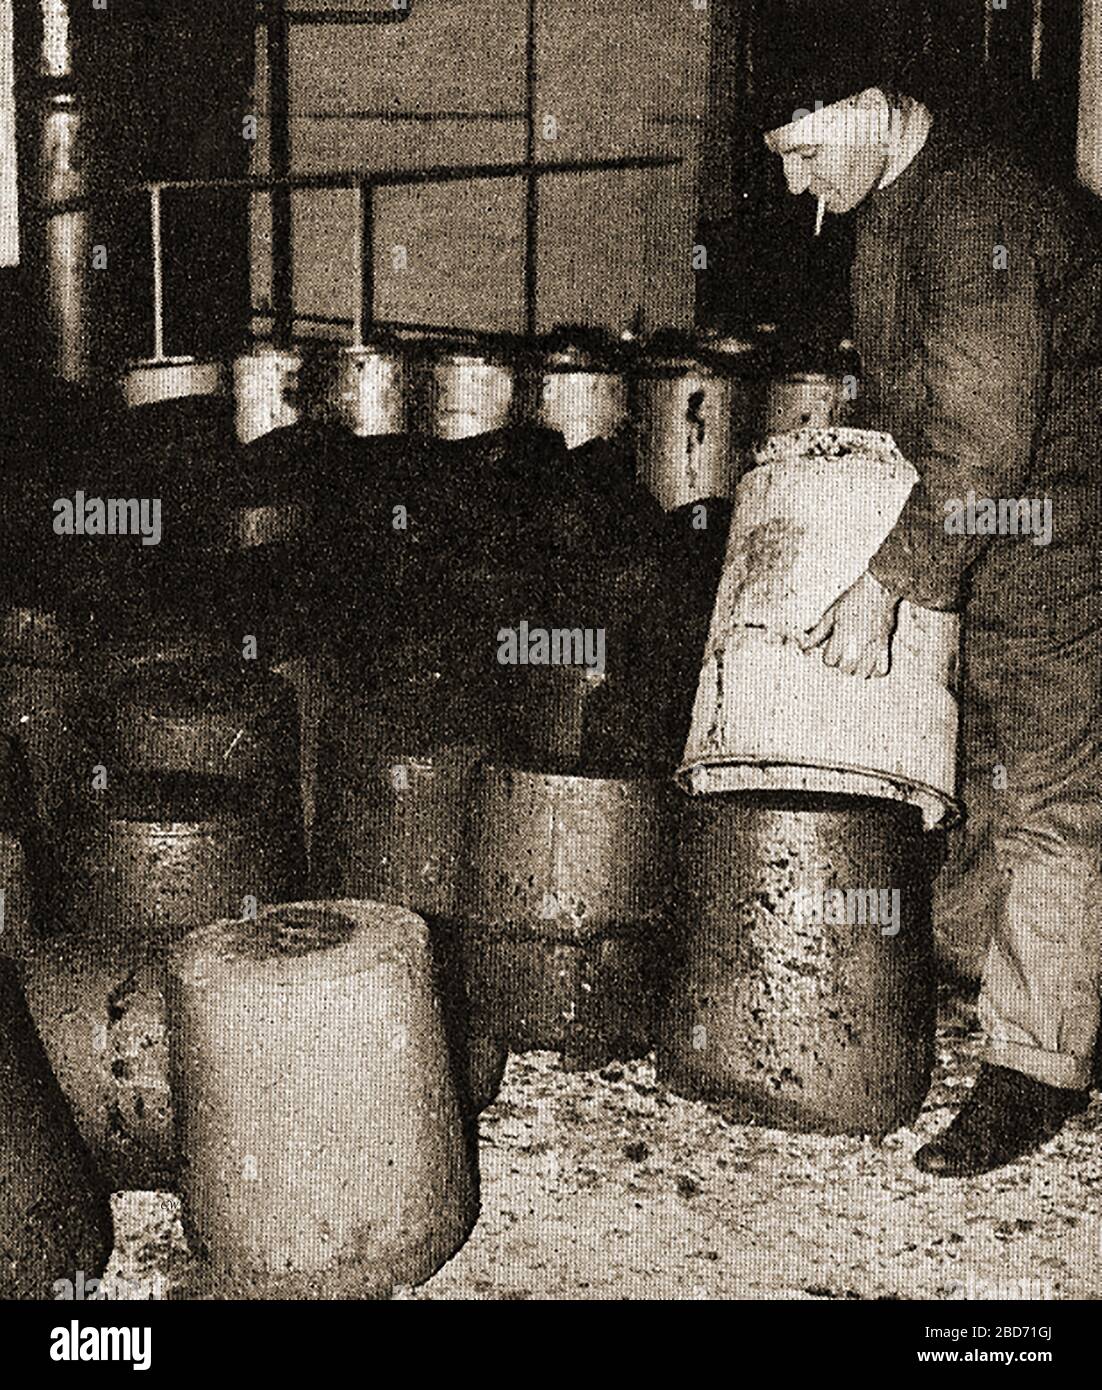 An early press photograph of kitchen waste (pigfeed puddings) made from waste that had been collected by the Westminster City Council Food Utilisation Plant. During the second world war, and for some time afterwards,  collections of   household food waste were collected and used as feed  in local municipal pig farms or boiled up as pig feed ‘puddings’ by special steam cookers. Pig clubs were even set up on school playing fields  to 'turn waste into ham and bacon' Stock Photo